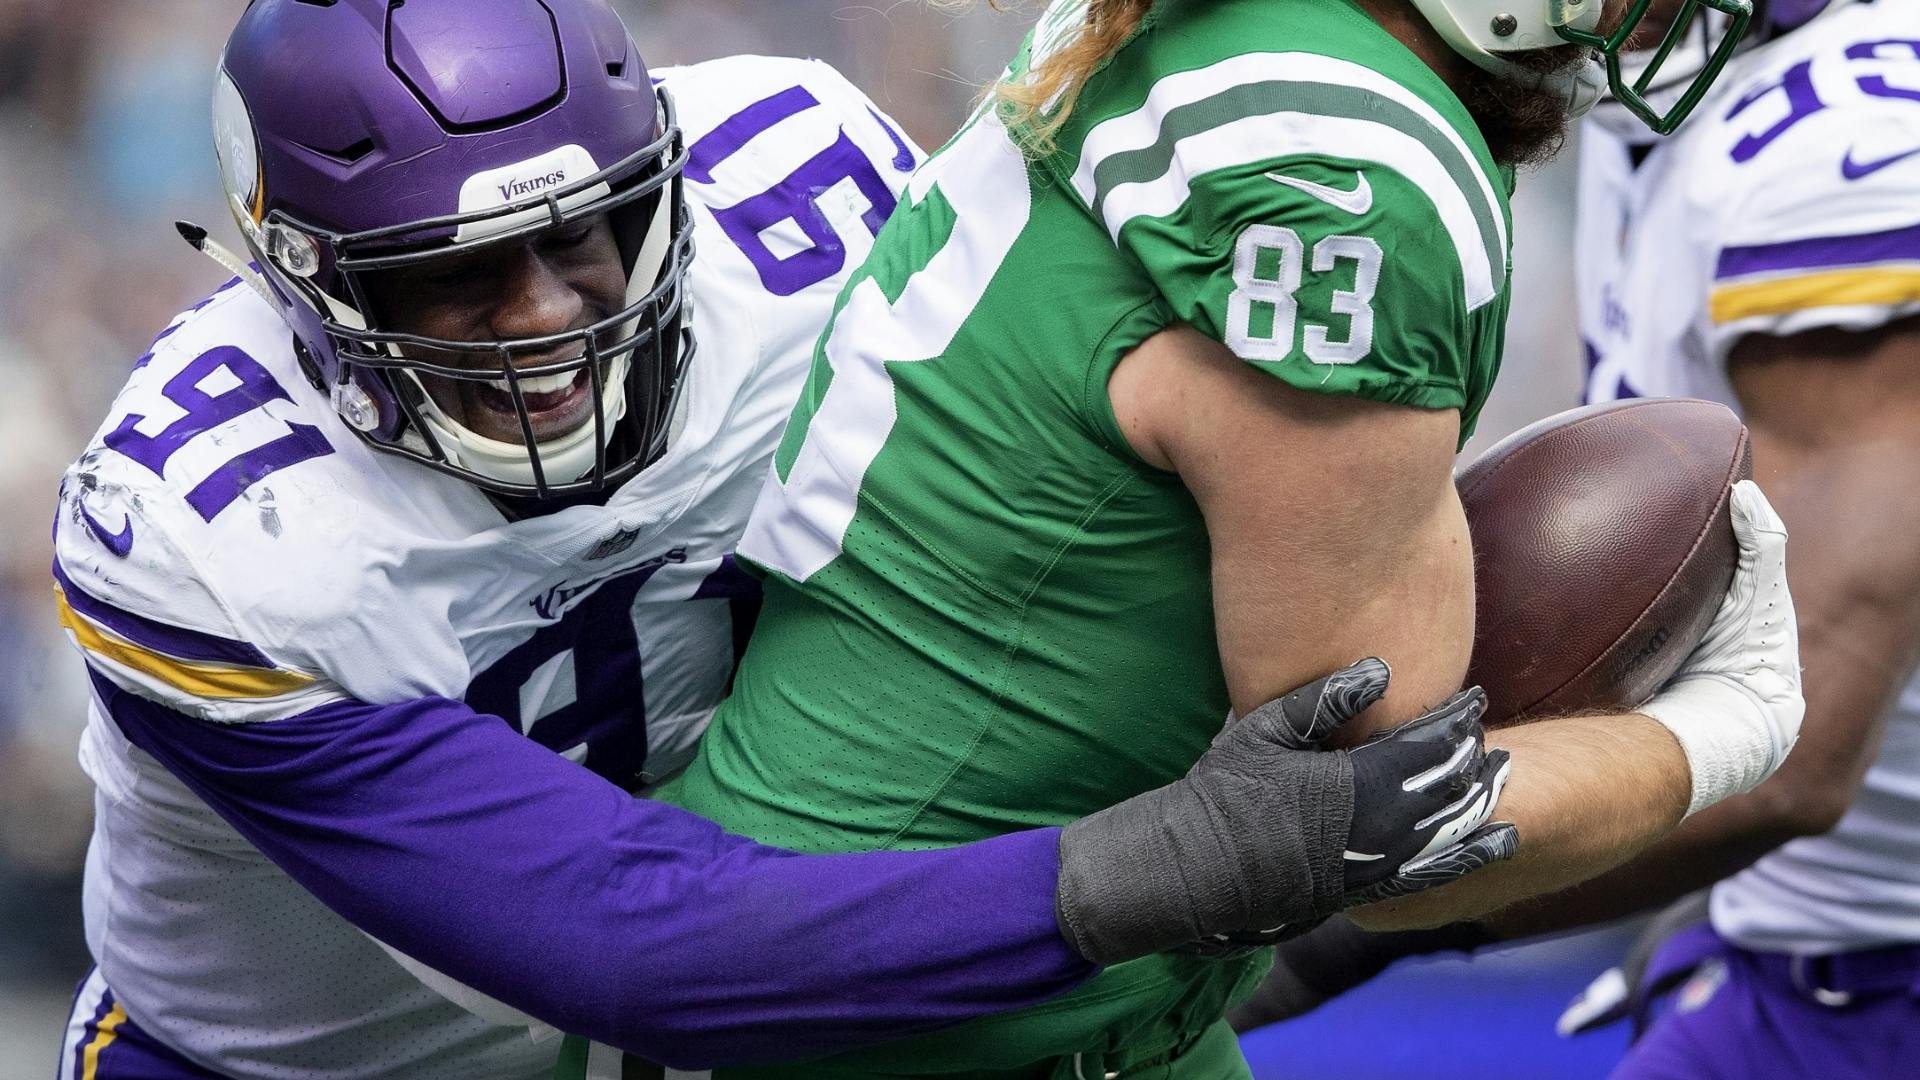 Vikings defensive end Stephen Weatherly has made a lot of improvements since his rookie season, and attributes his growth to defensive line coach Andre Patterson.